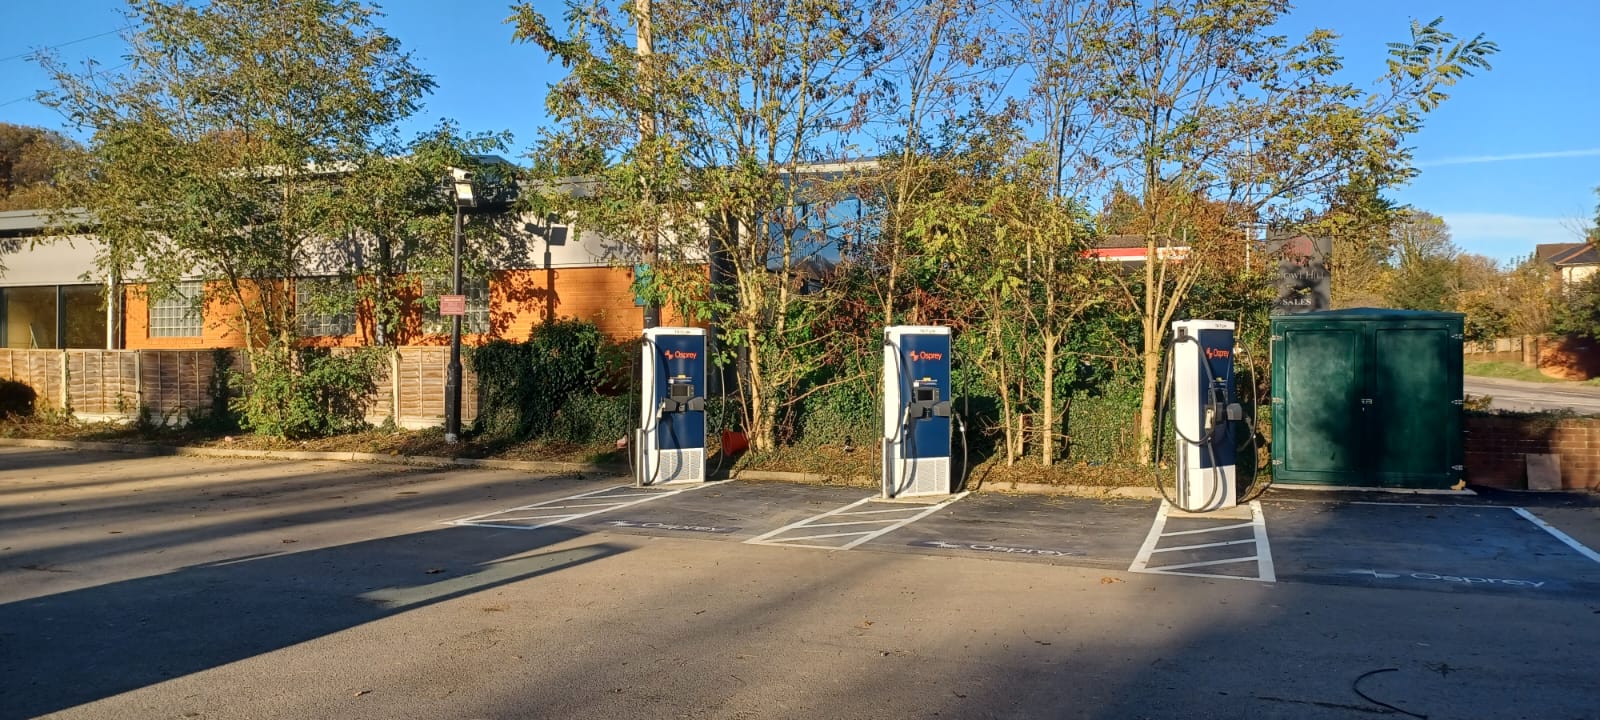 Osprey Charging opens new rapid EV charging site at the Bird in Hand in Knowl Hill, supporting critical public charging infrastructure